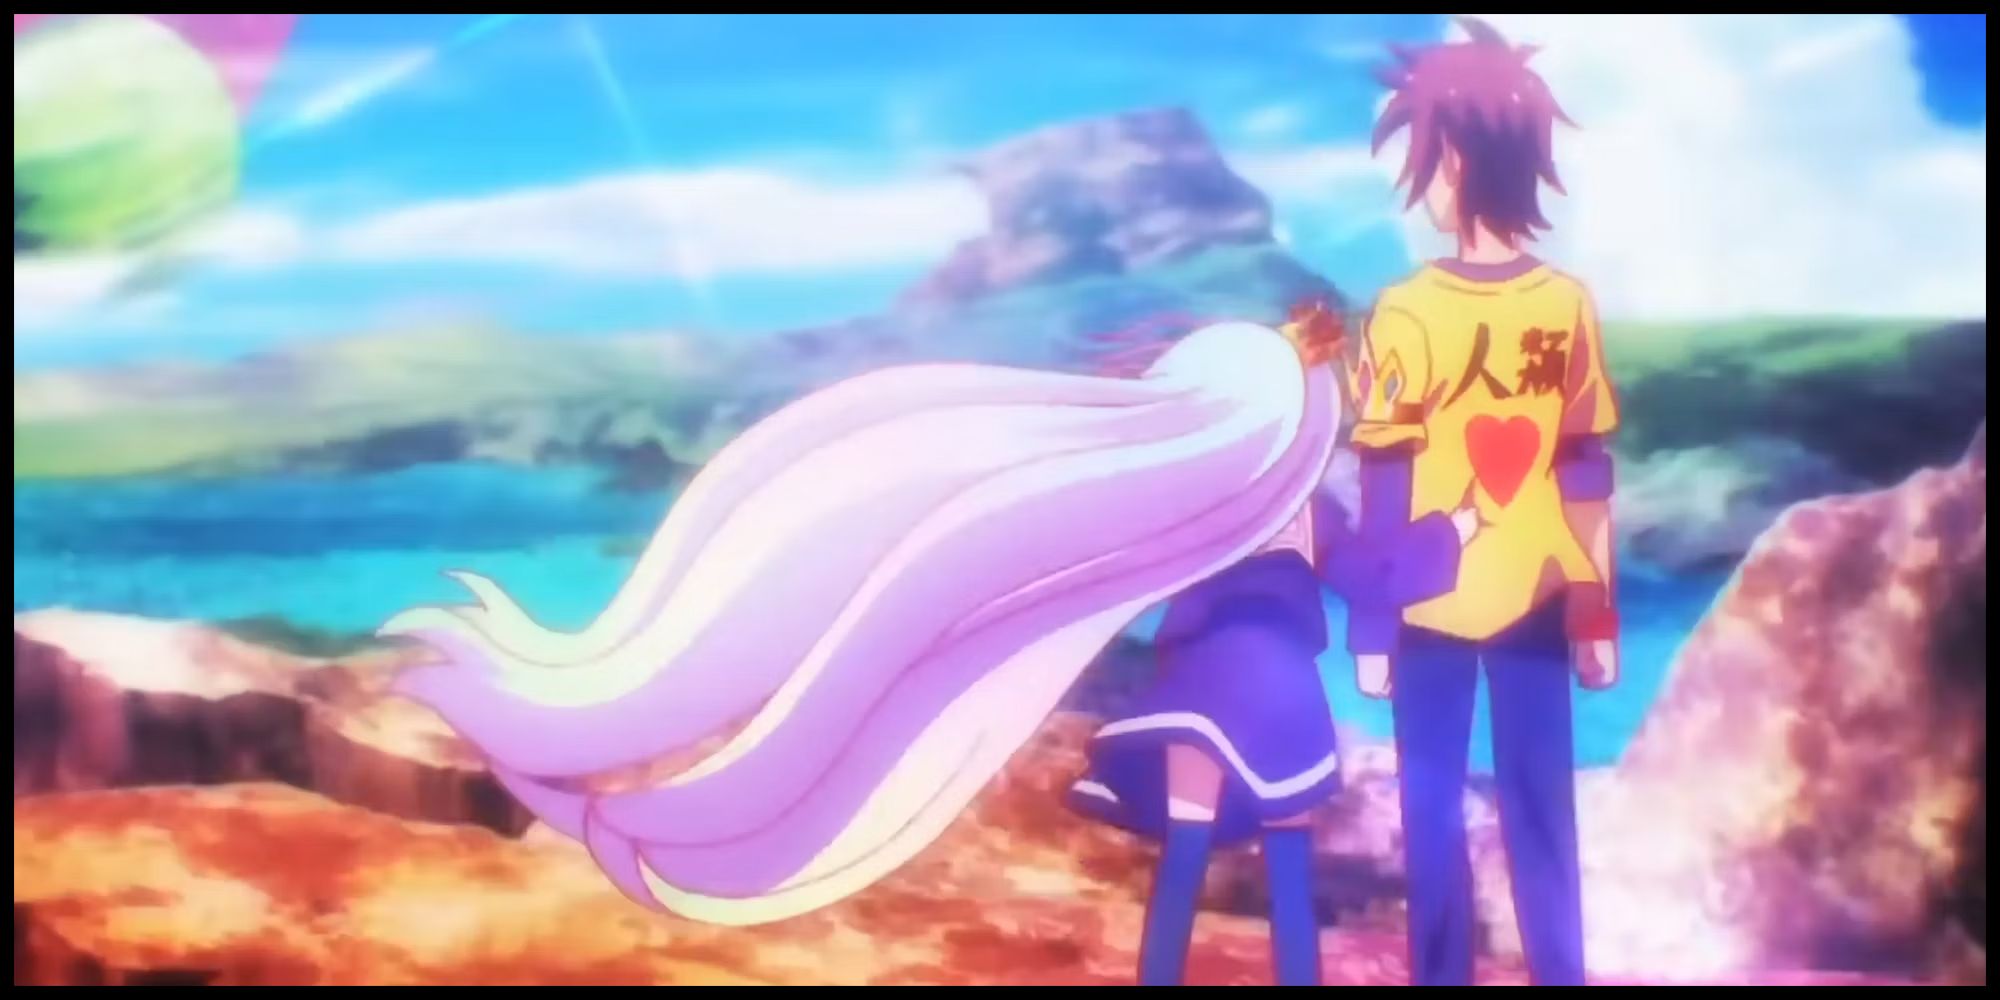 No Game No Life - Sora And Shiro Overlooking Their New World Called Disboard